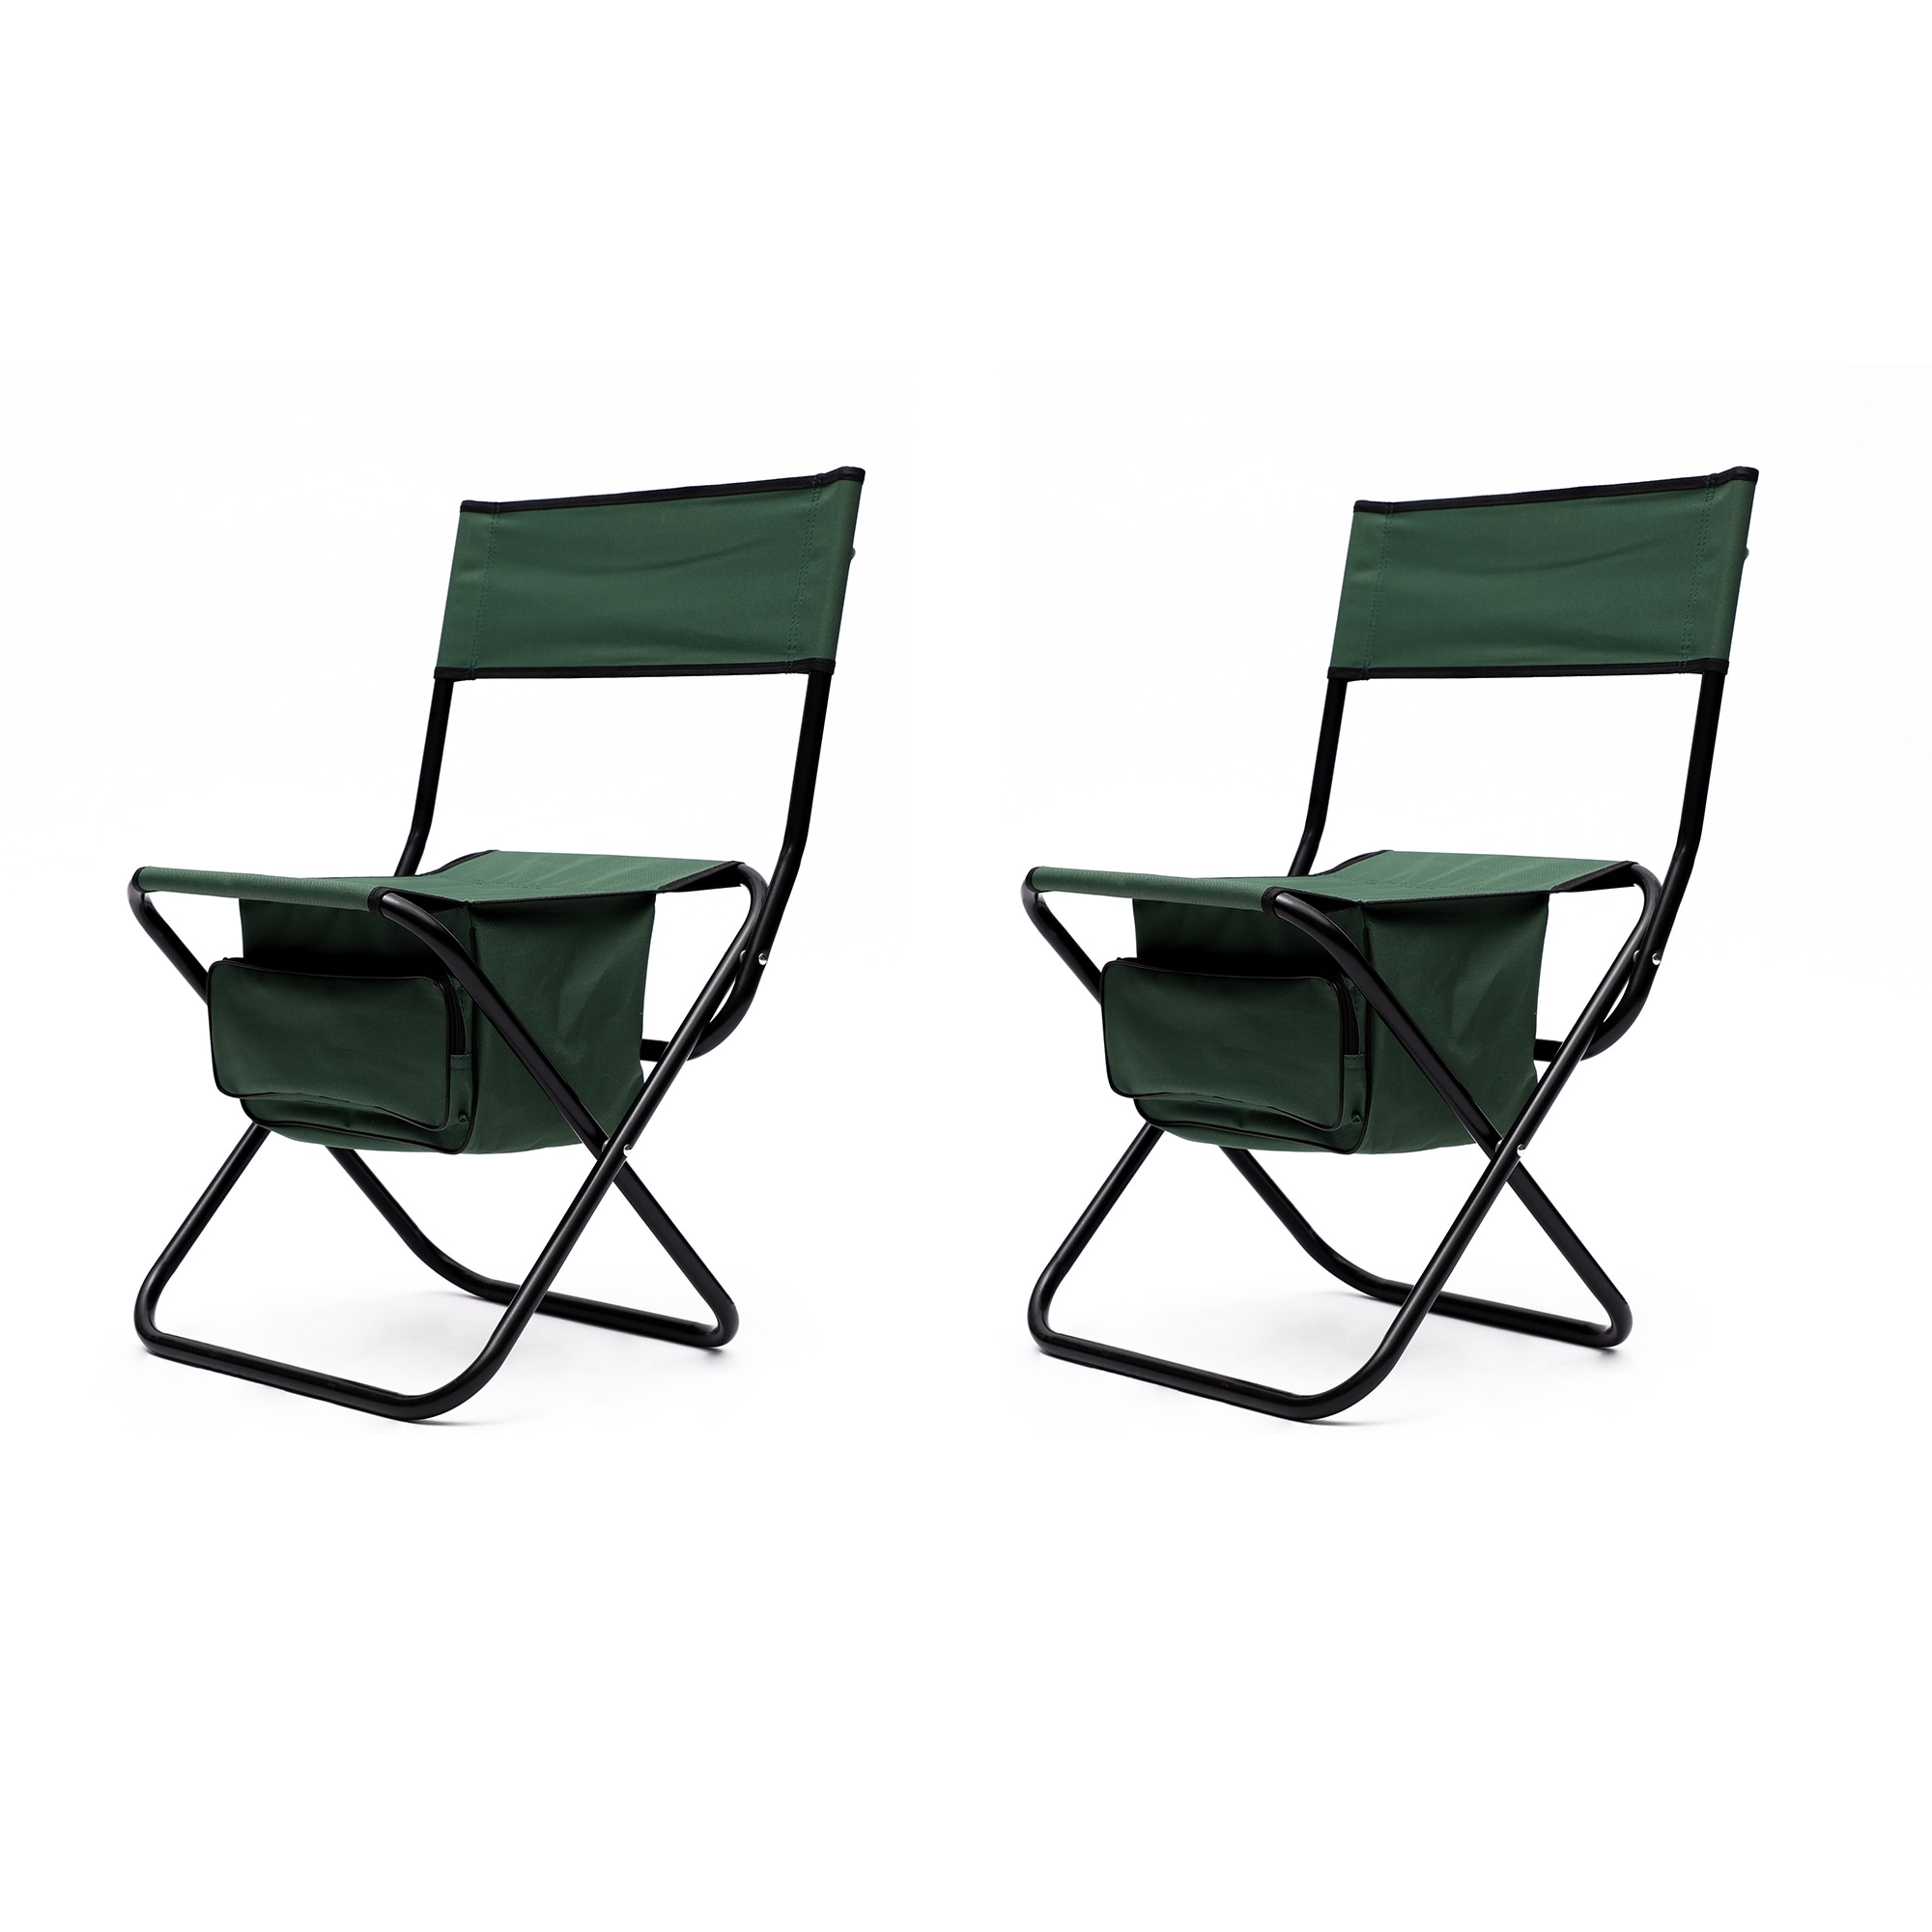 2-piece Set Folding Outdoor Camping Chair With Storage Bag  Portable Chair For Camping  Picnics  280 Lbs Weight Capacity